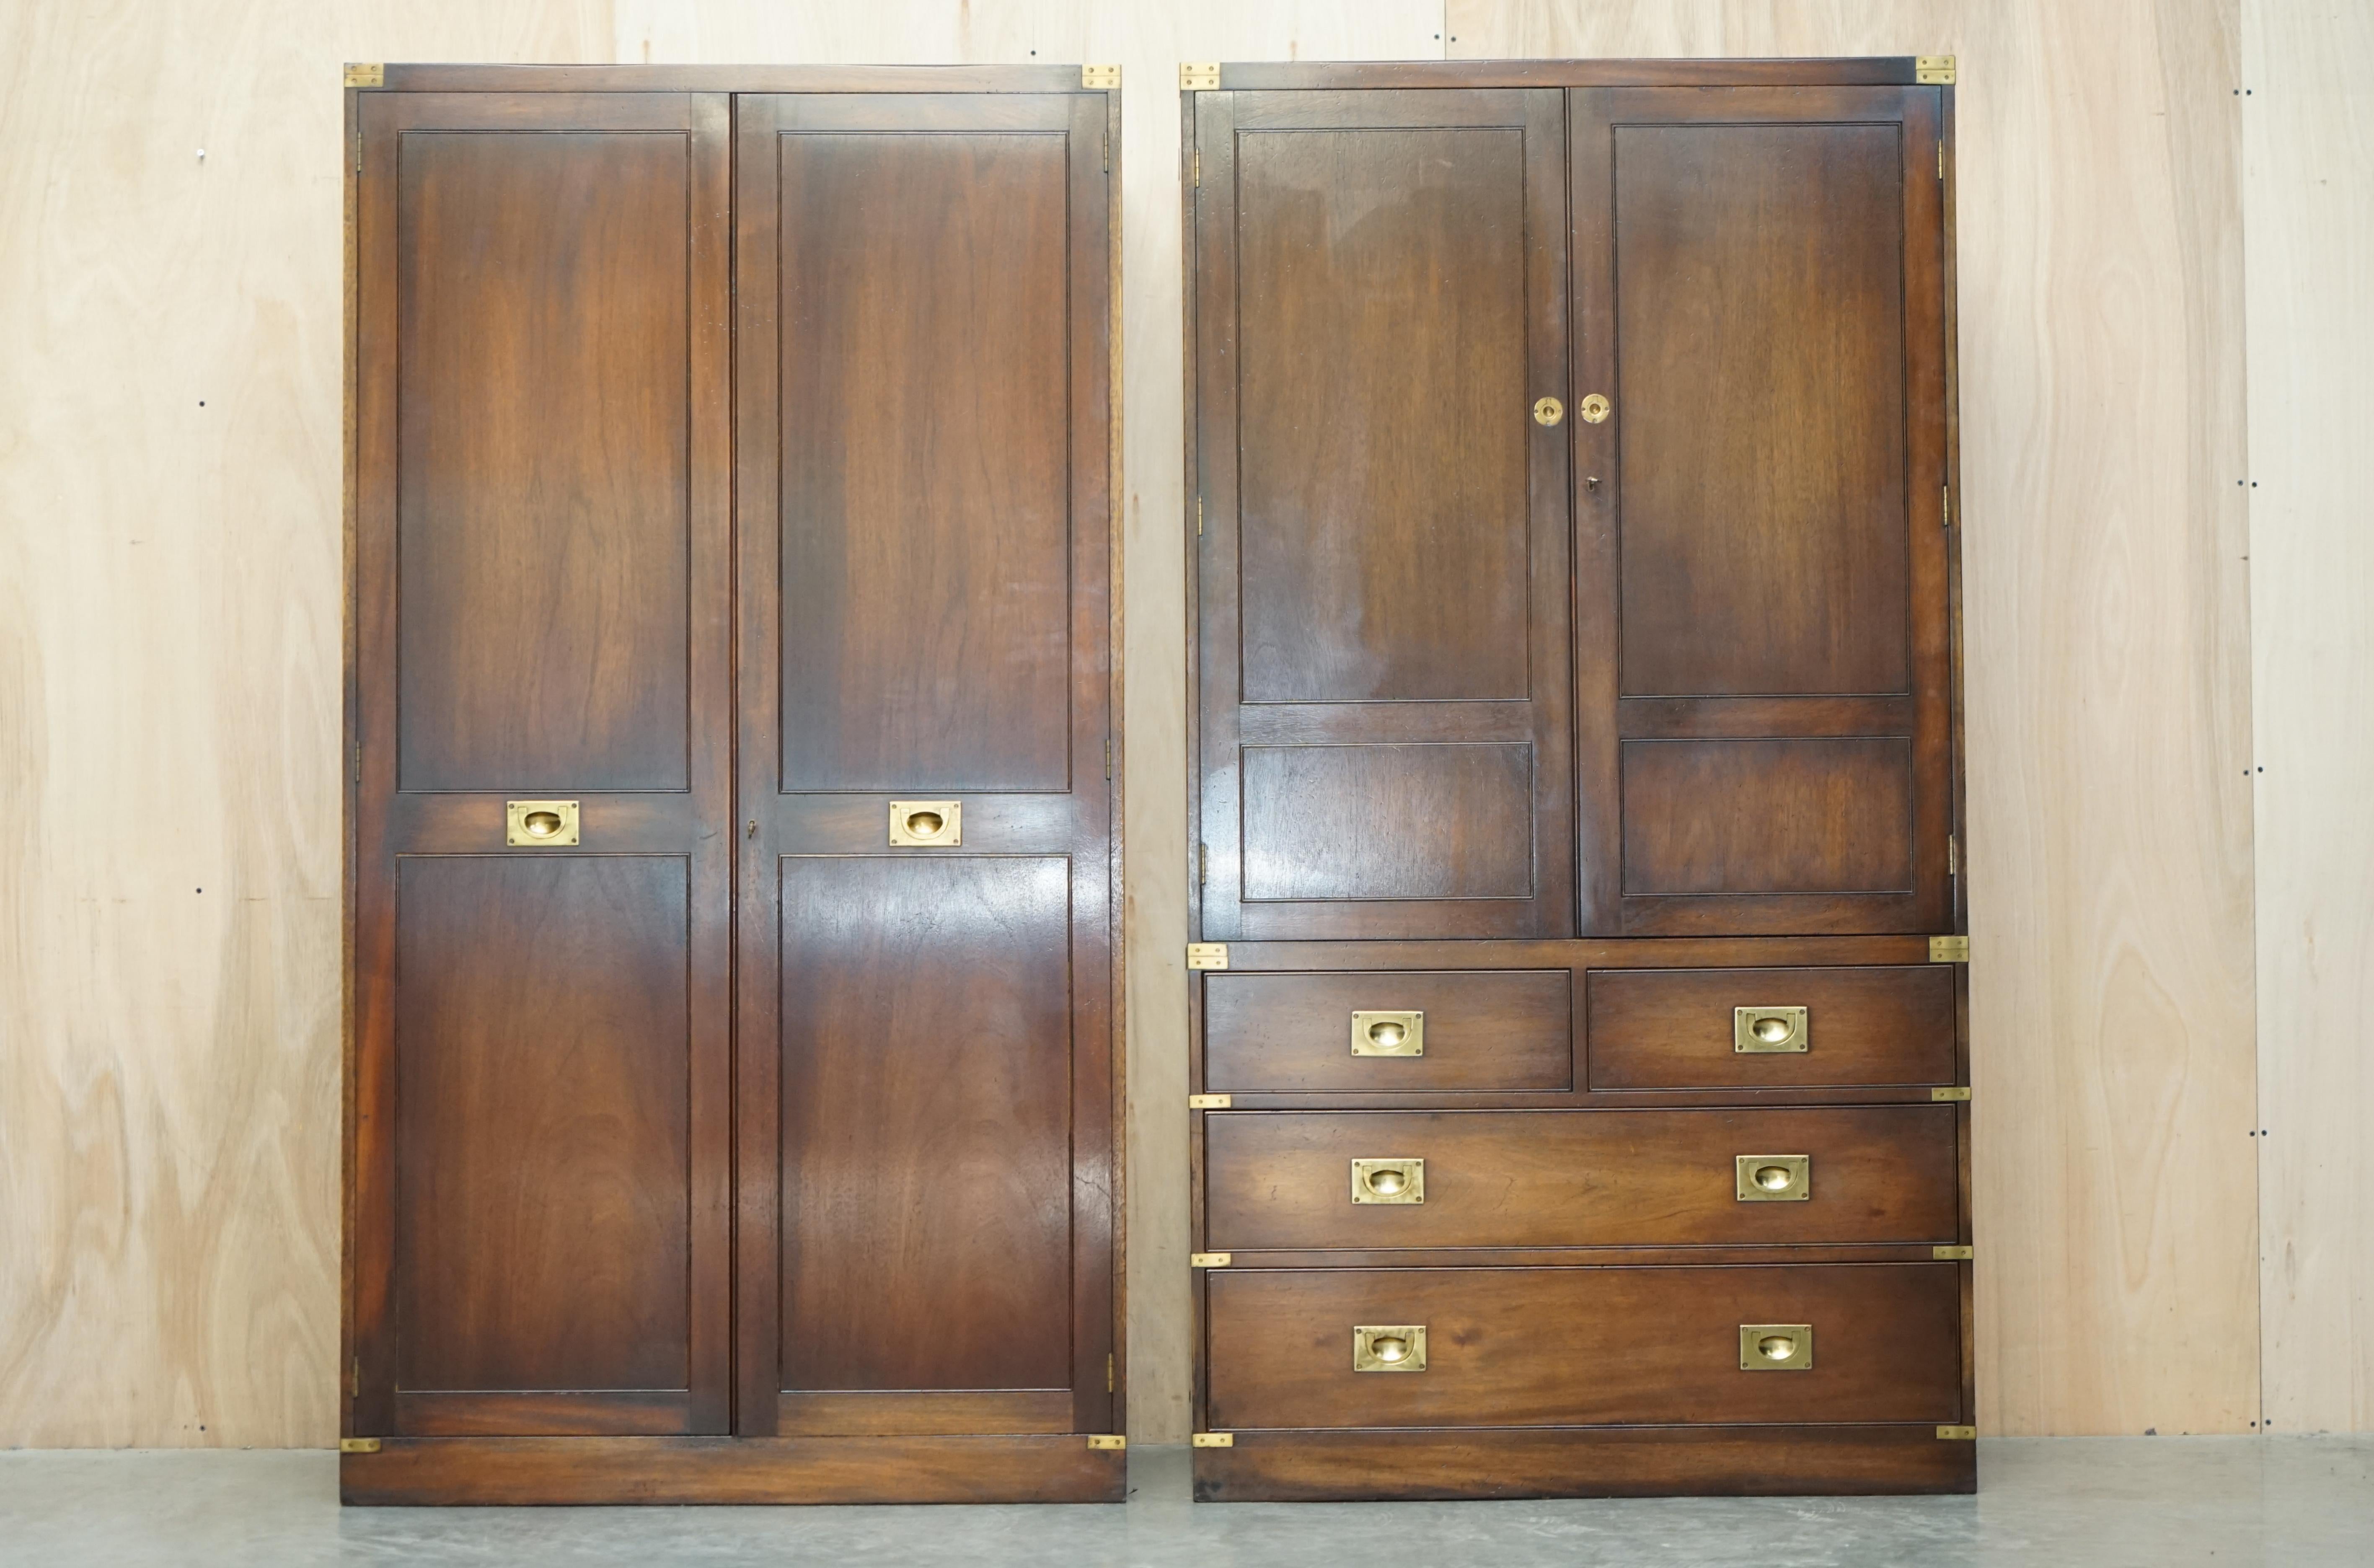 We are delighted to offer for sale this stunning pair of Vintage, Military Campaign, Mahogany & Brass wardrobes RRP £7999 each

This auction is for both wardrobes as pictured, one has a built in triple bank of drawers, the other is a full length